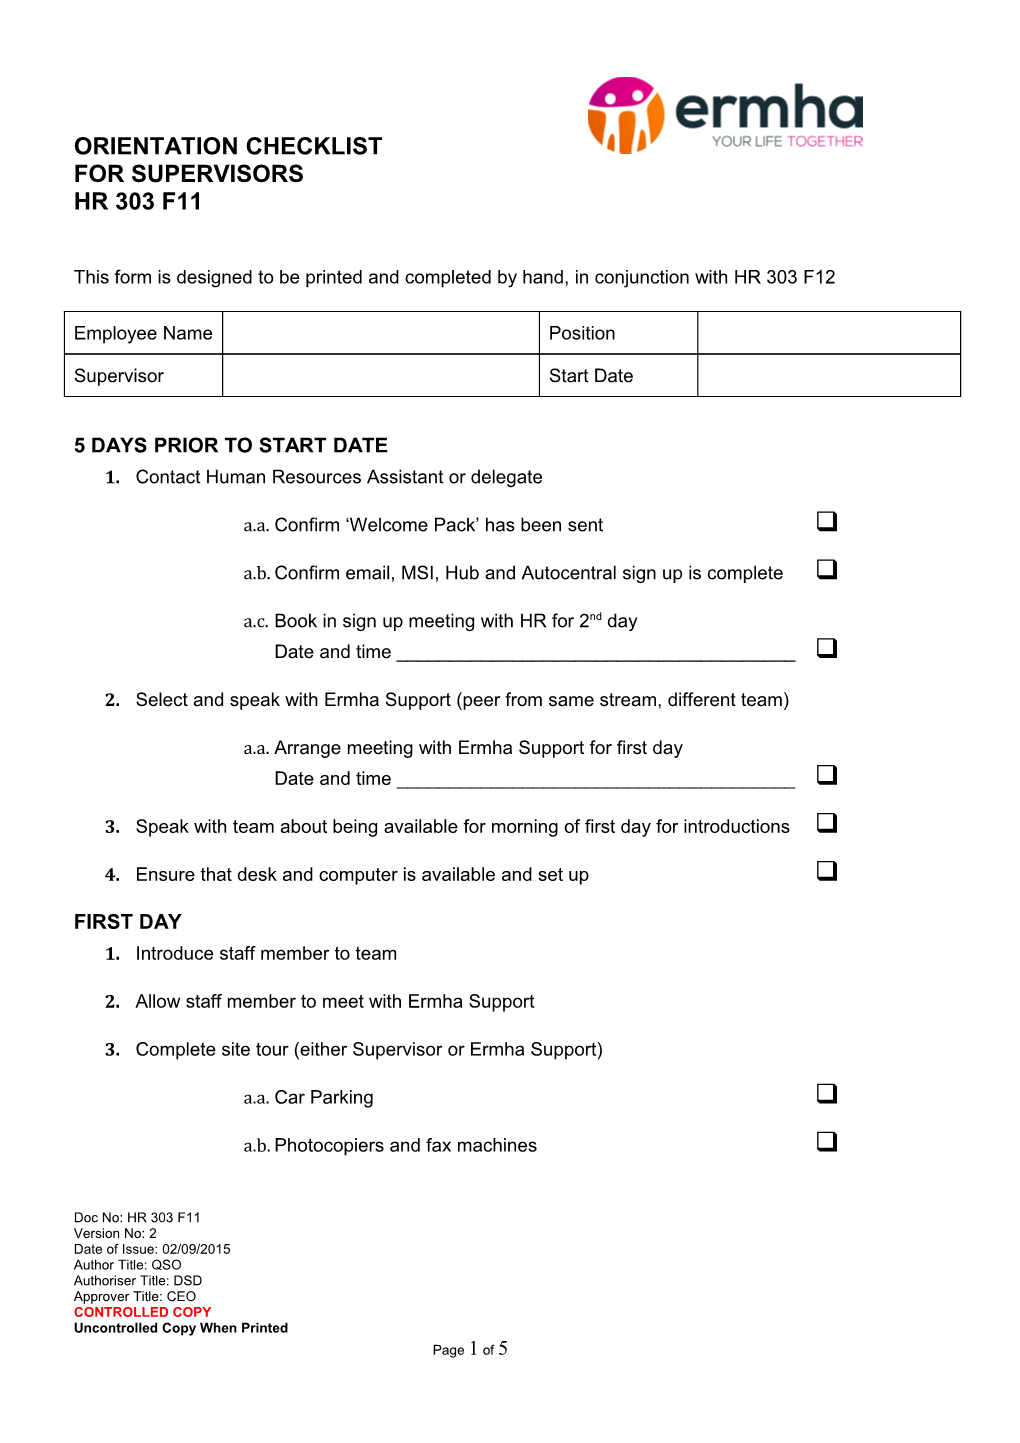 This Form Is Designed to Be Printed and Completed by Hand, in Conjunction with HR 303 F12